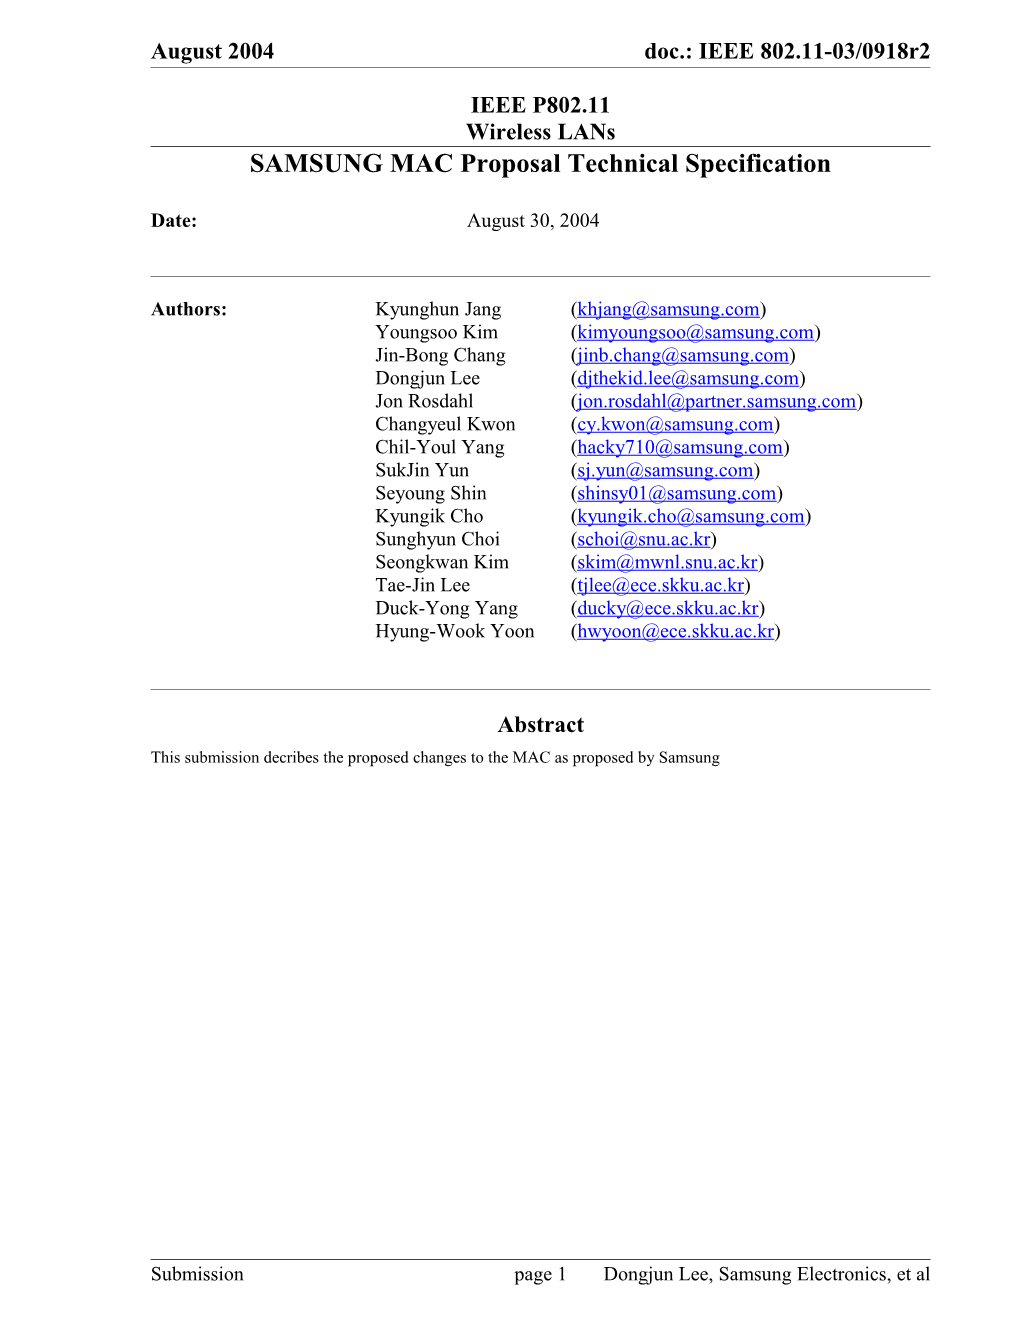 SAMSUNG MAC Proposal Technical Specification